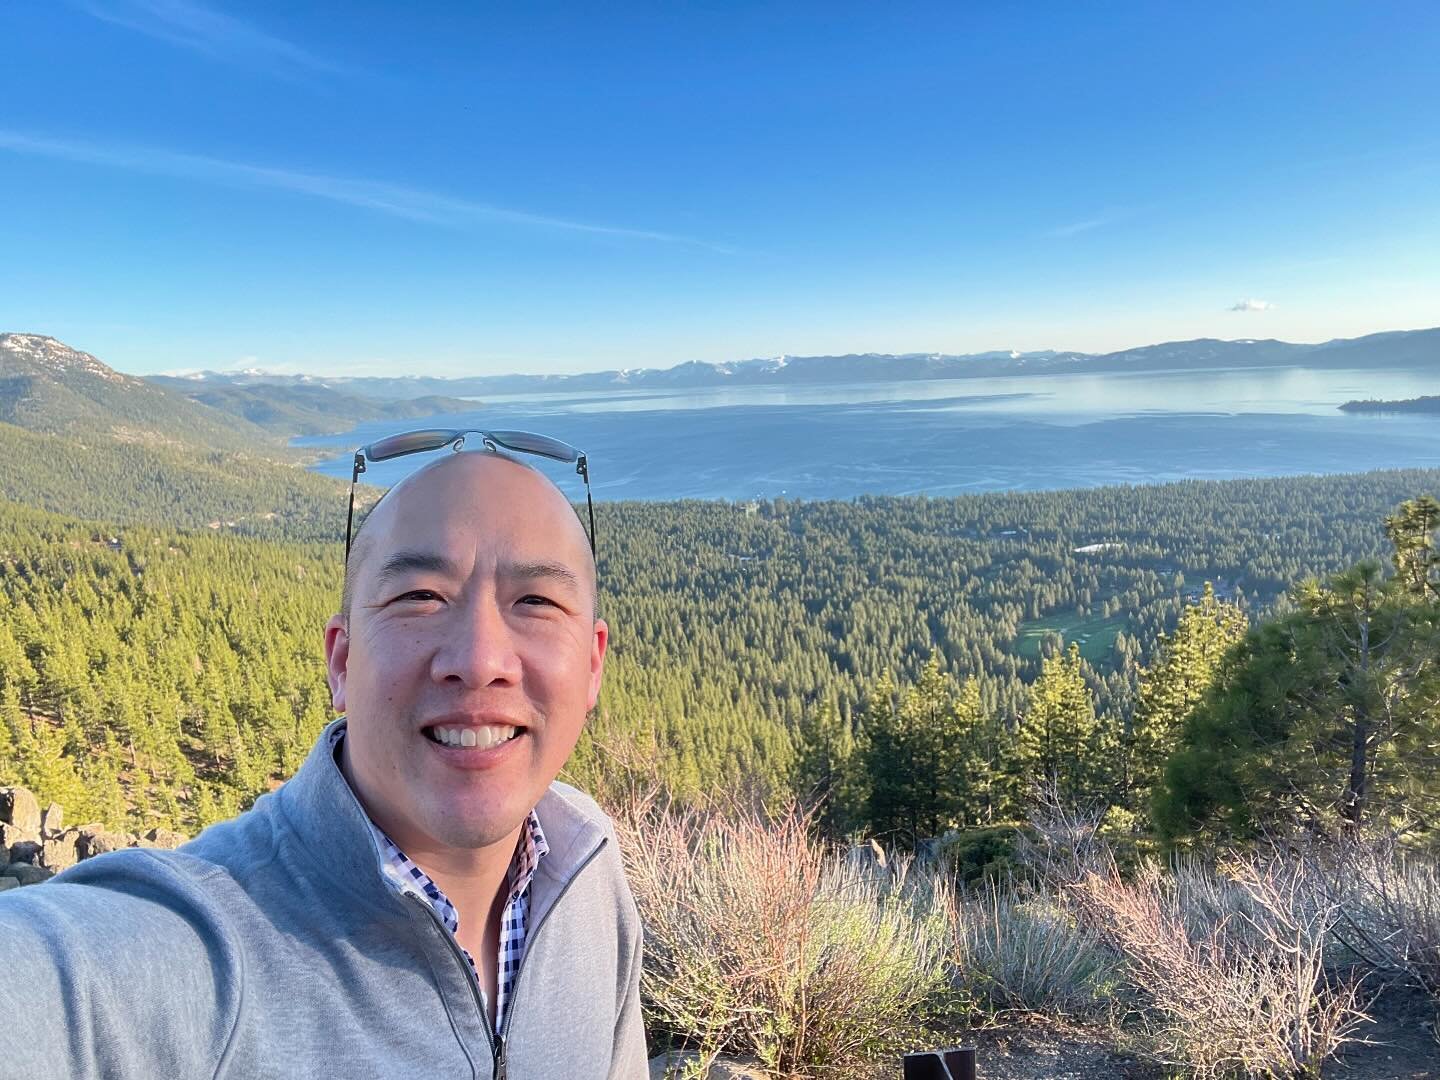 Arrived early enough in Reno yesterday to head over the mountain to breathe in Lake Tahoe.  This will never get old! 

Rehearsals for the @renochamberorchestra season finale commence tonight.

#workhardplayhard #conductor #travelisthebesteducation